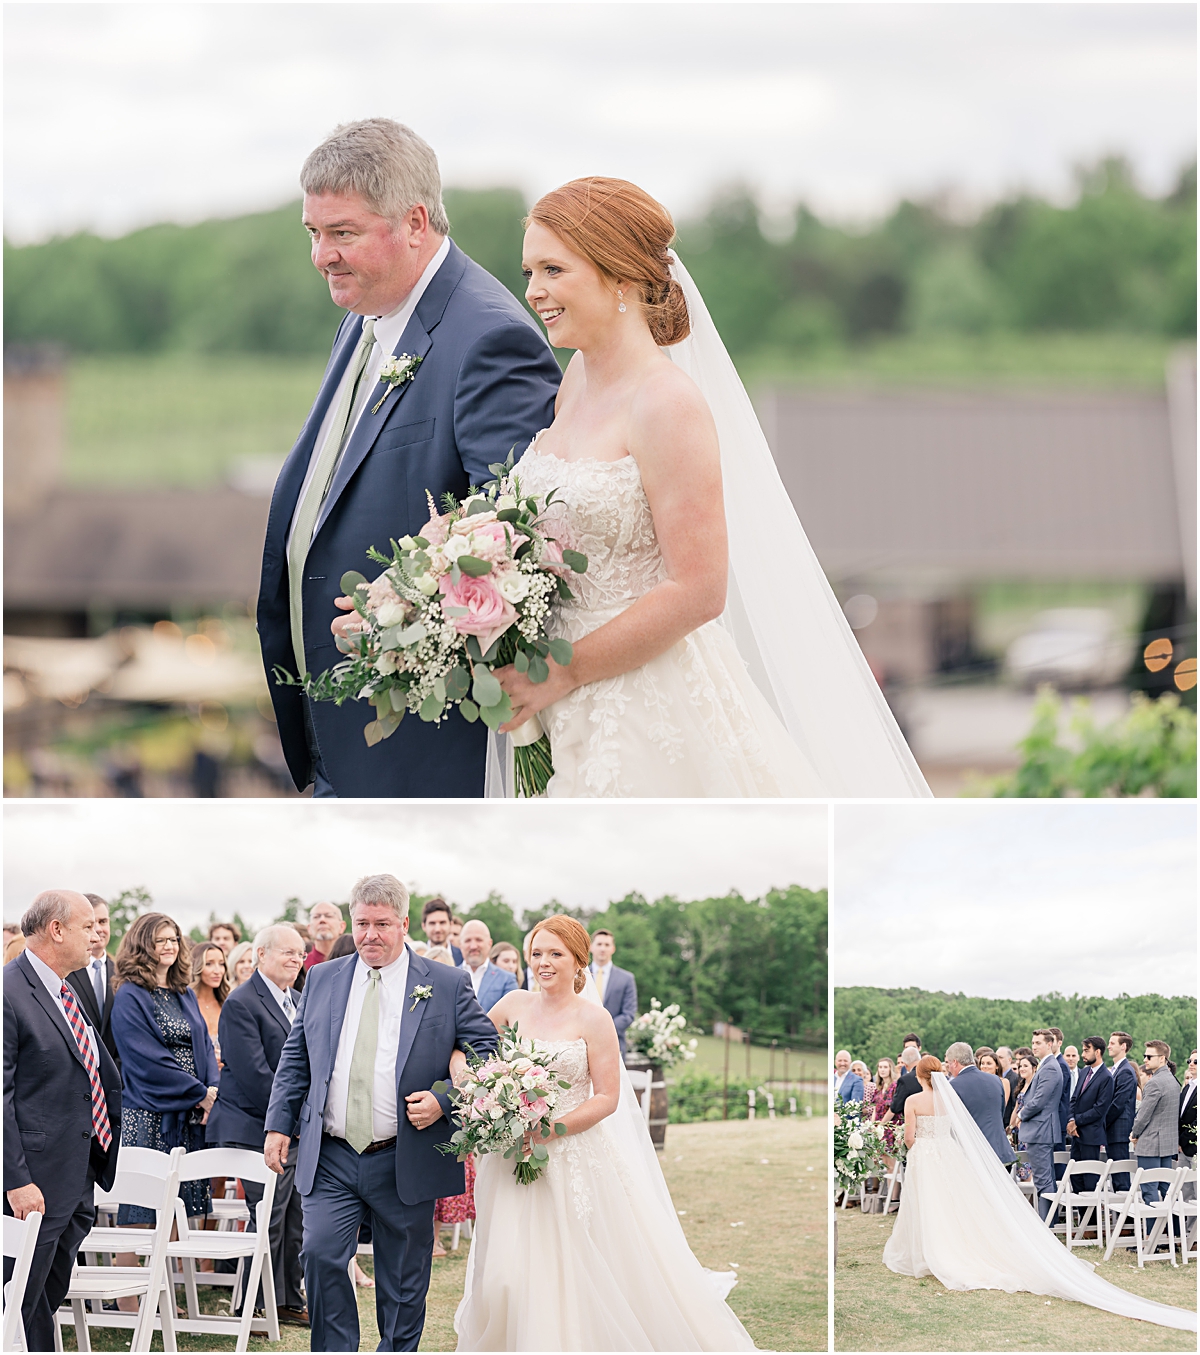 Collage of Grace and her father walking her down the aisle at Cleveland GA Wedding Venues